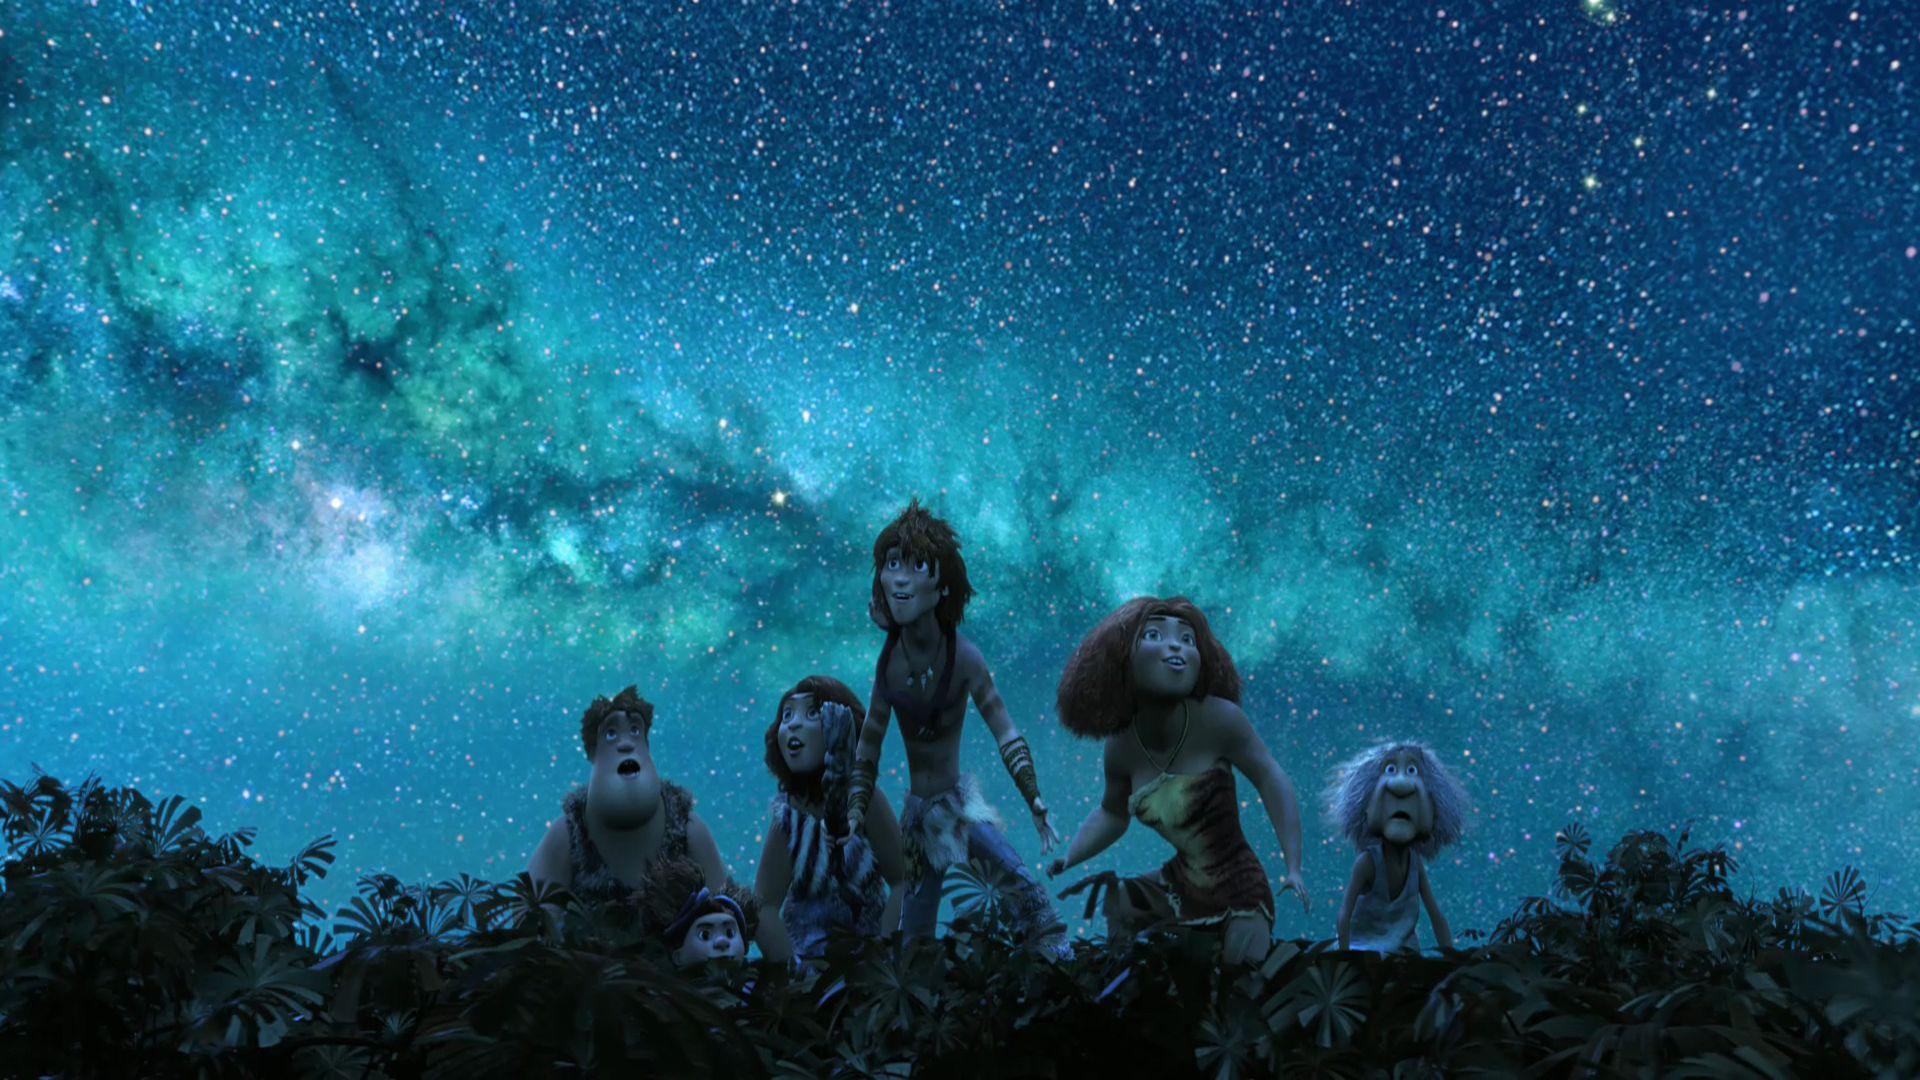 The Croods Wallpaper for PC. Full HD Picture